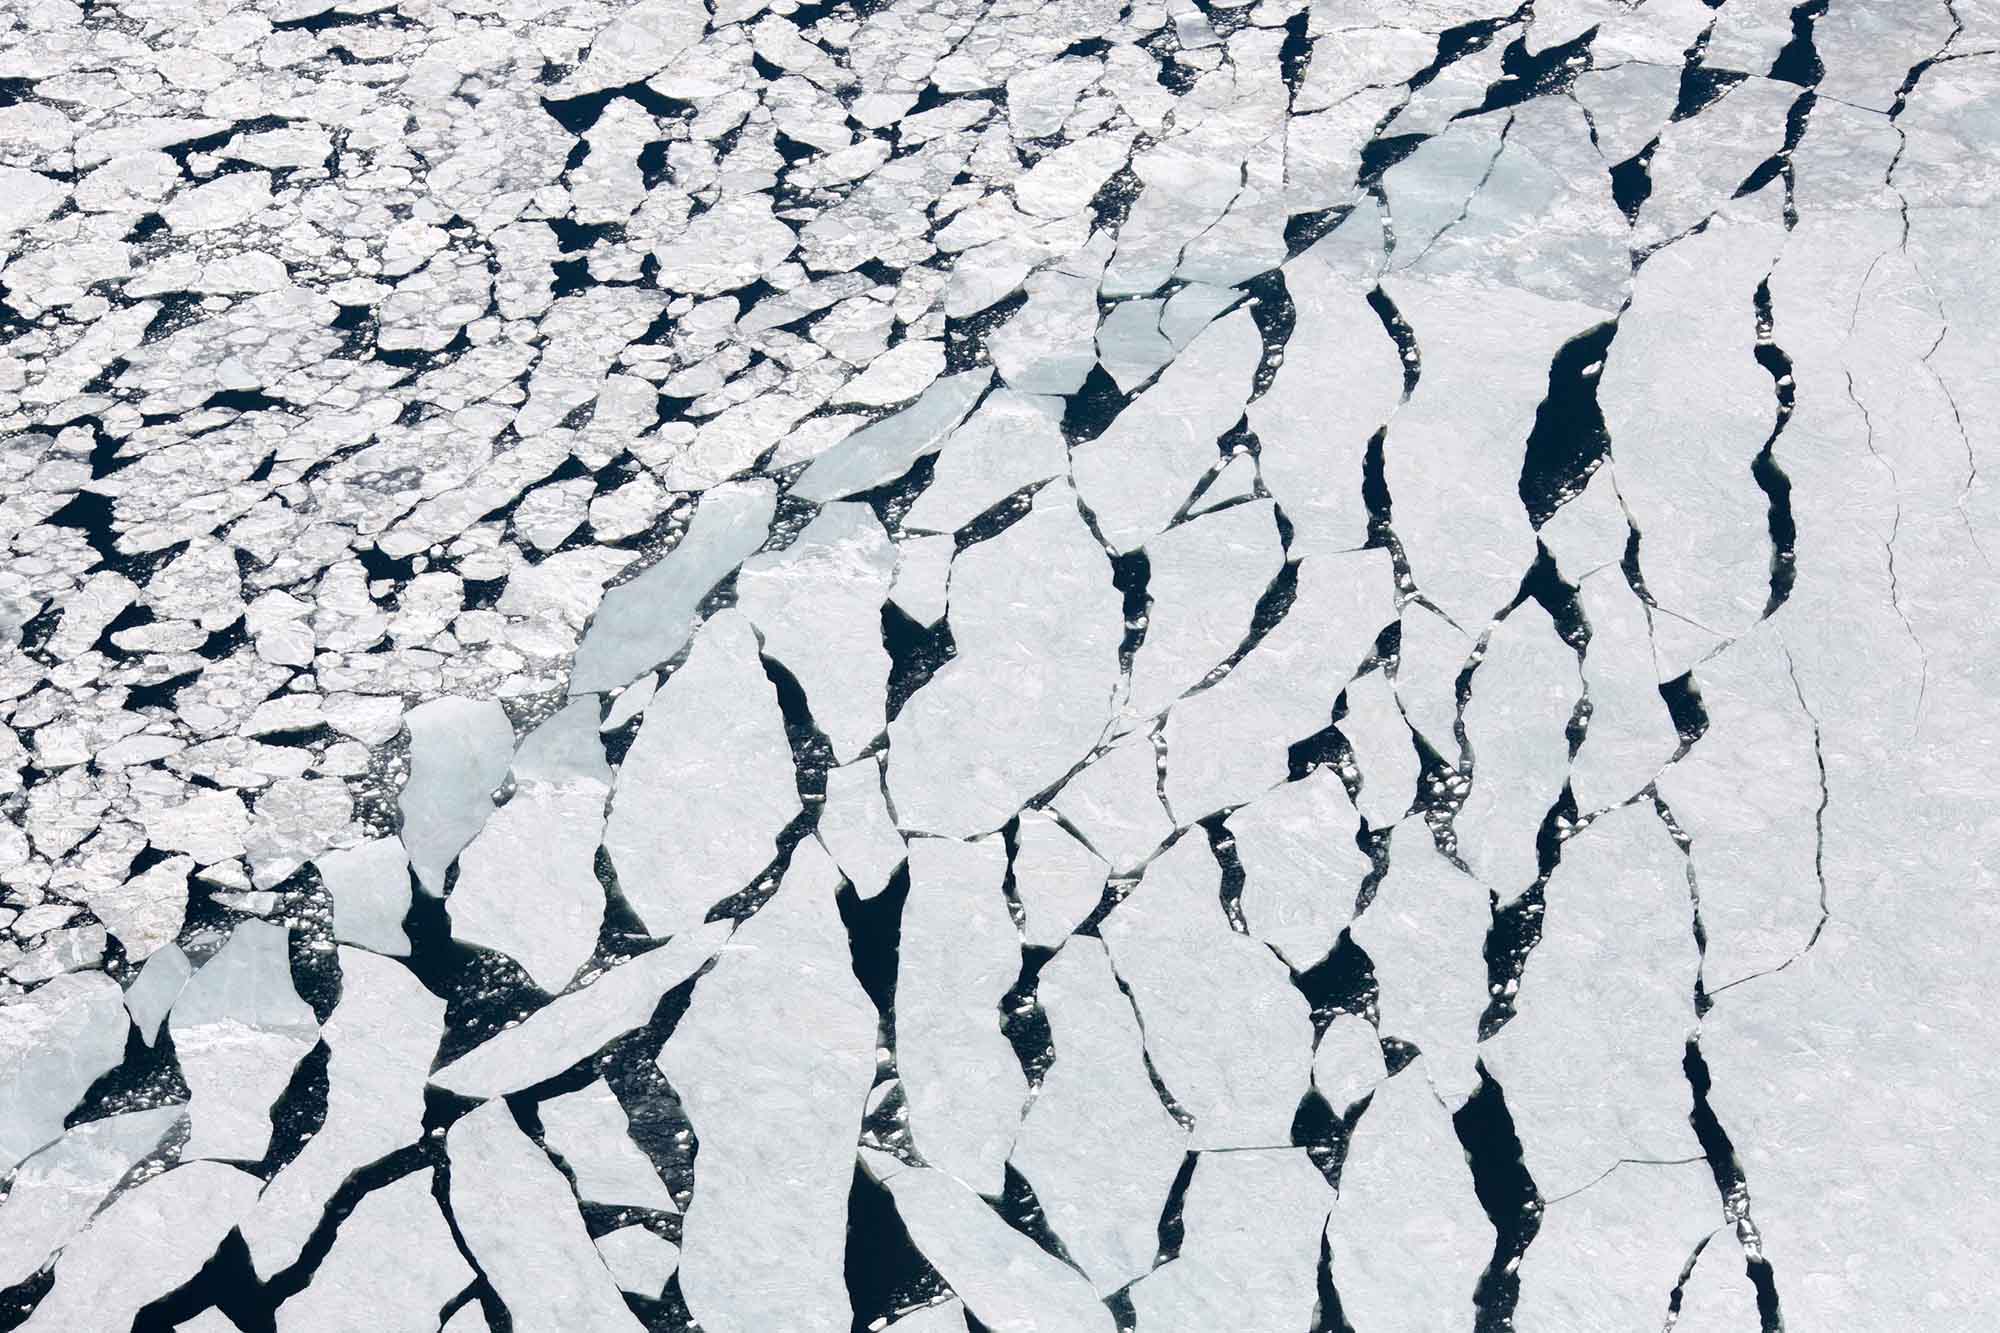 Alex MacLean, 'Ice Fractures, Eastham, MA 2015'